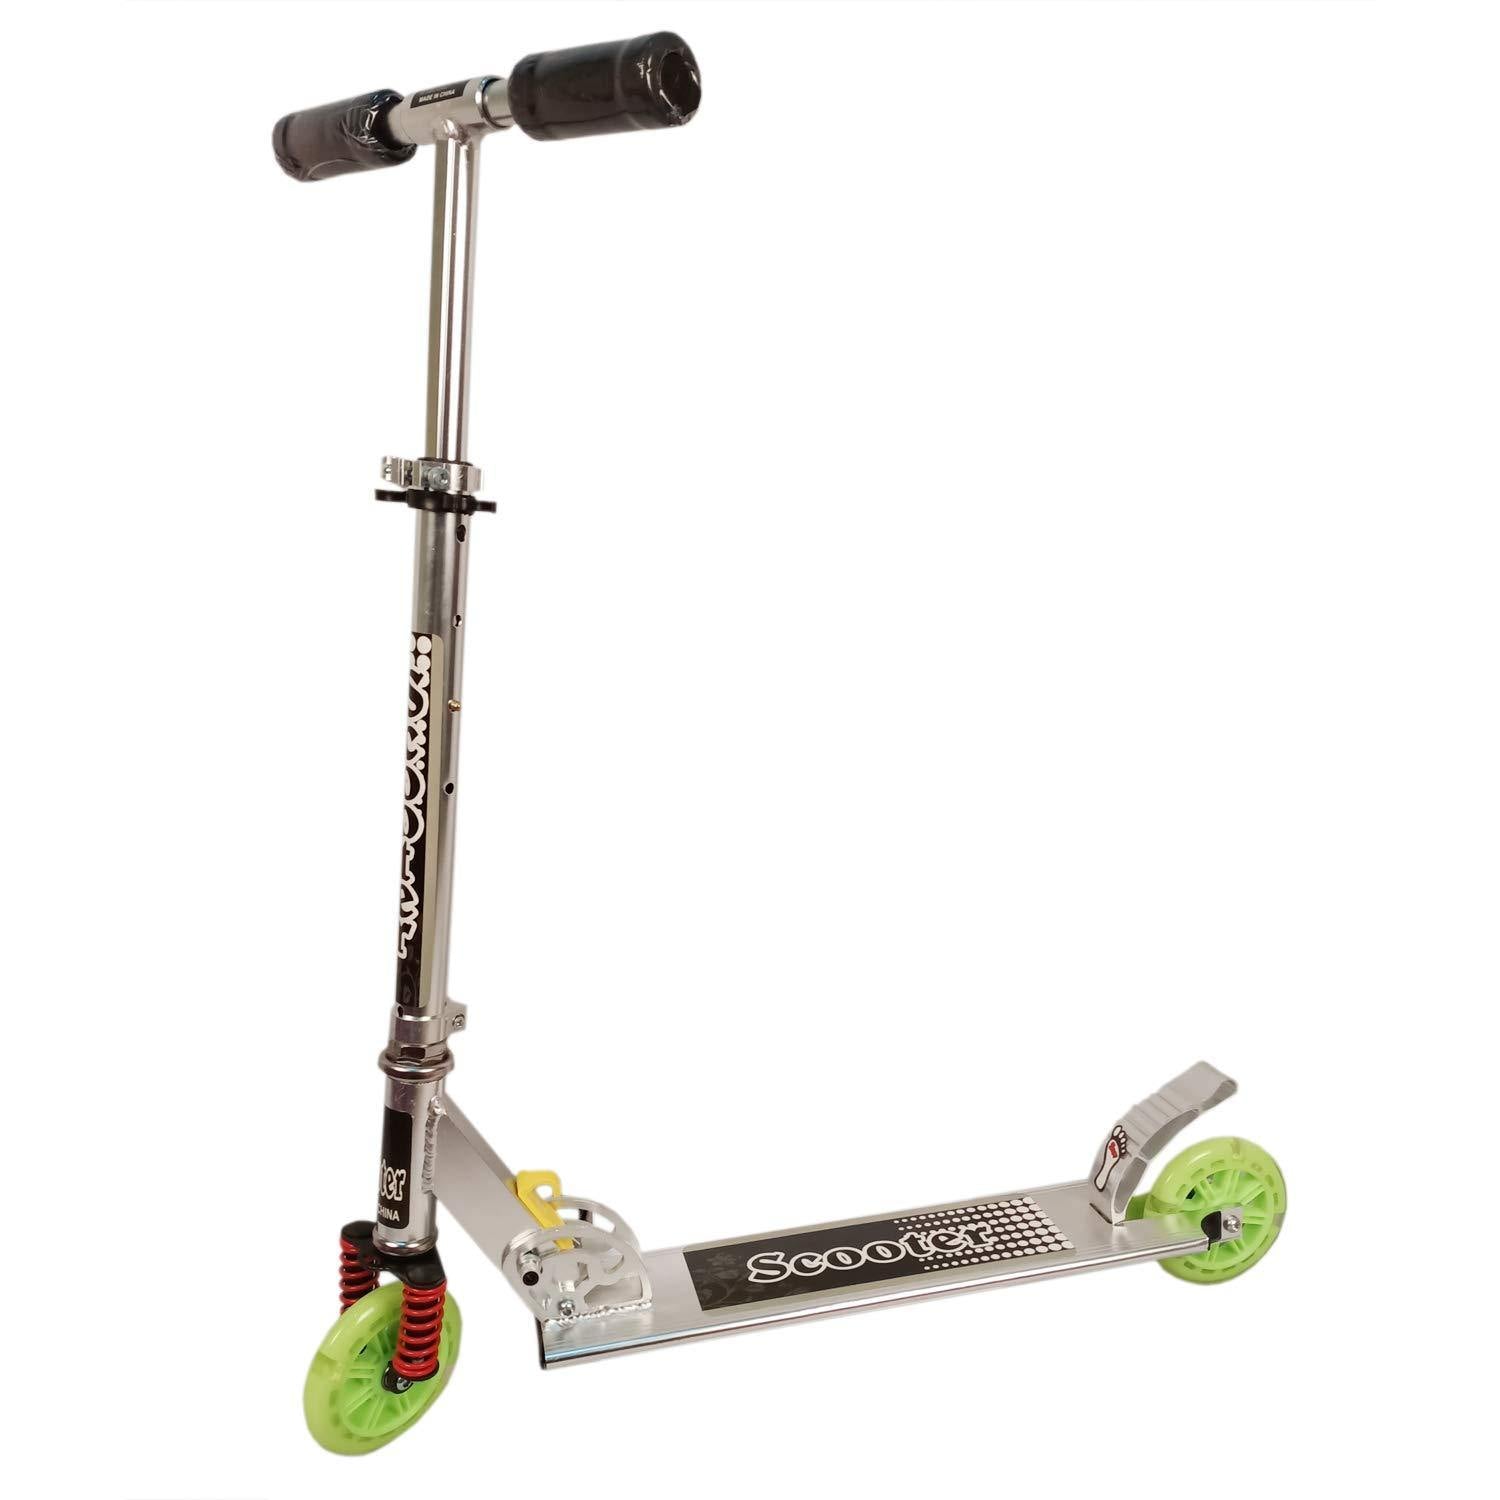 Prokick Road Runner Scooter for Kids of 3 to 14 Years Age - 75 KG Capacity (Green) - Best Price online Prokicksports.com